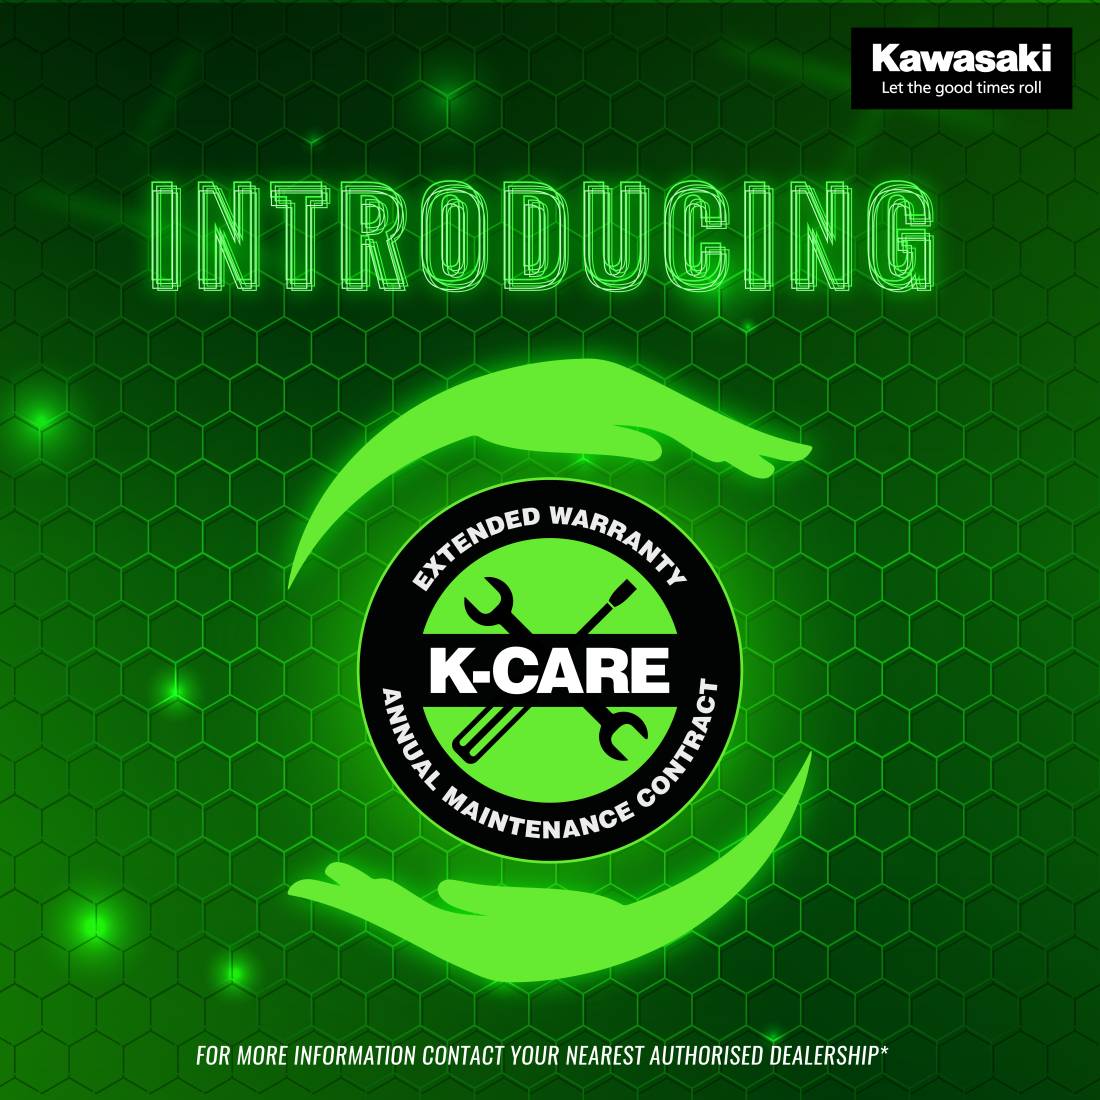 Kawasaki K-Care Extended Warranty & AMC Package Launched